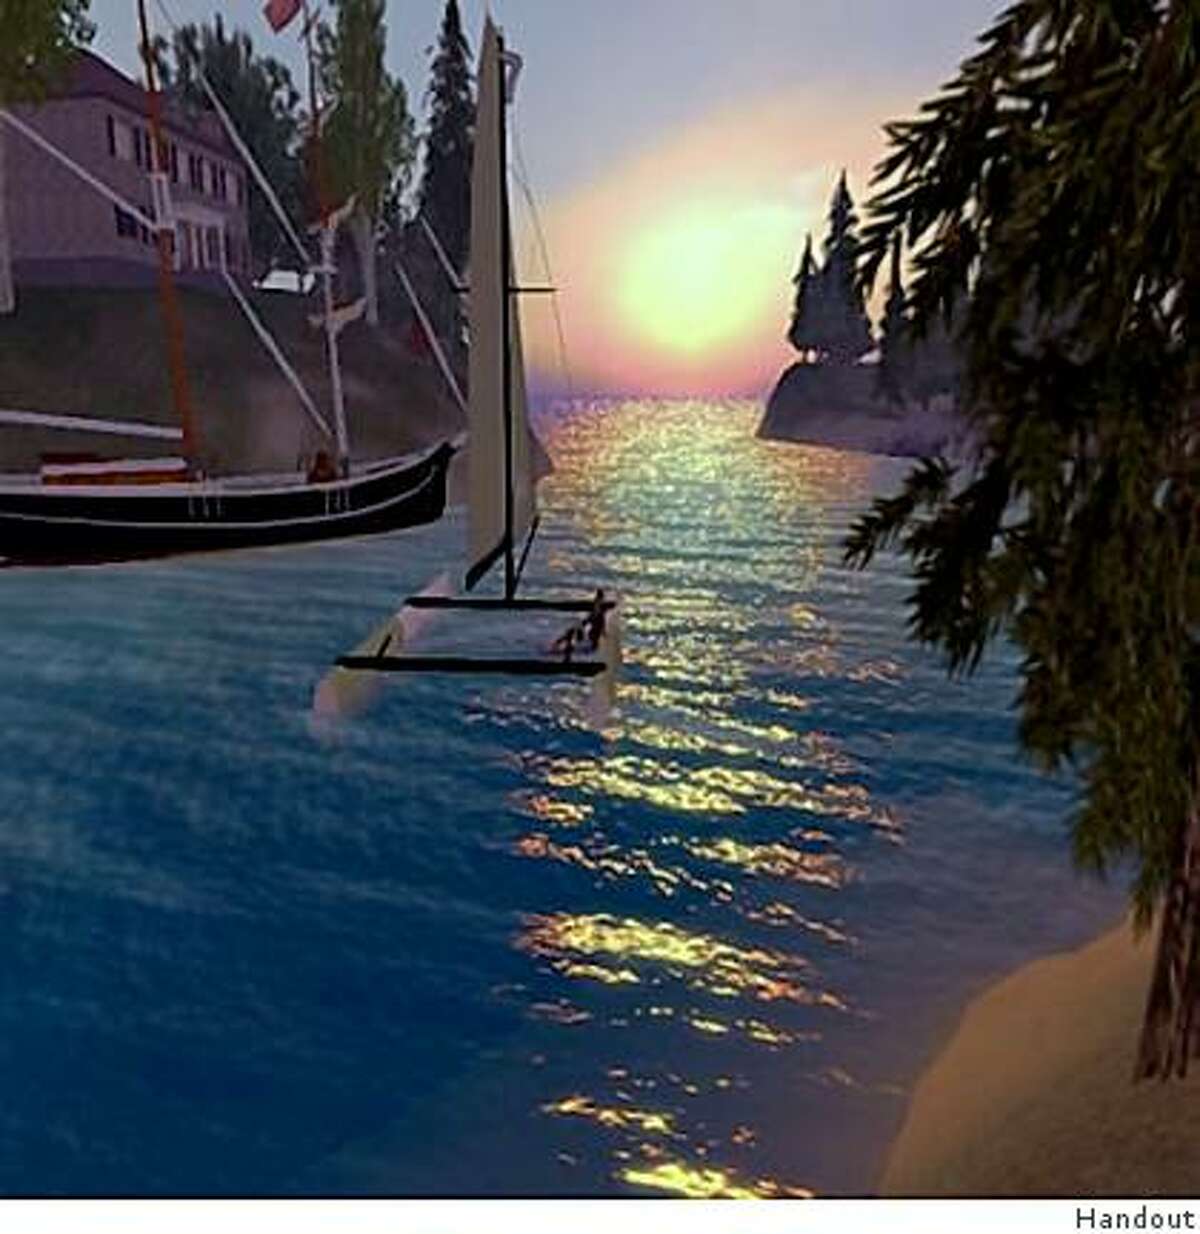 The Sailor?s Cove case was not unlike many real-world disputes: It was an ownership conflict based on an alleged oral contract. Attorney Ross Dannenberg represented two users who assisted a virtual real estate developer in running a large group of islands in Second Life called Sailor?s Cove. When the three parted ways, Dannenberg argued that the owner had previously made his two managers full partners and co-owners in the venture. But the owner of record claimed full ownership.The case was settled out of court, with Dannenberg?s clients receiving a financial settlement.Robert T. Brackman, attorney for the owner, issued a press release after the settlement saying that it was still unknown whether conversations between digital avatars could legally constitute oral contracts.